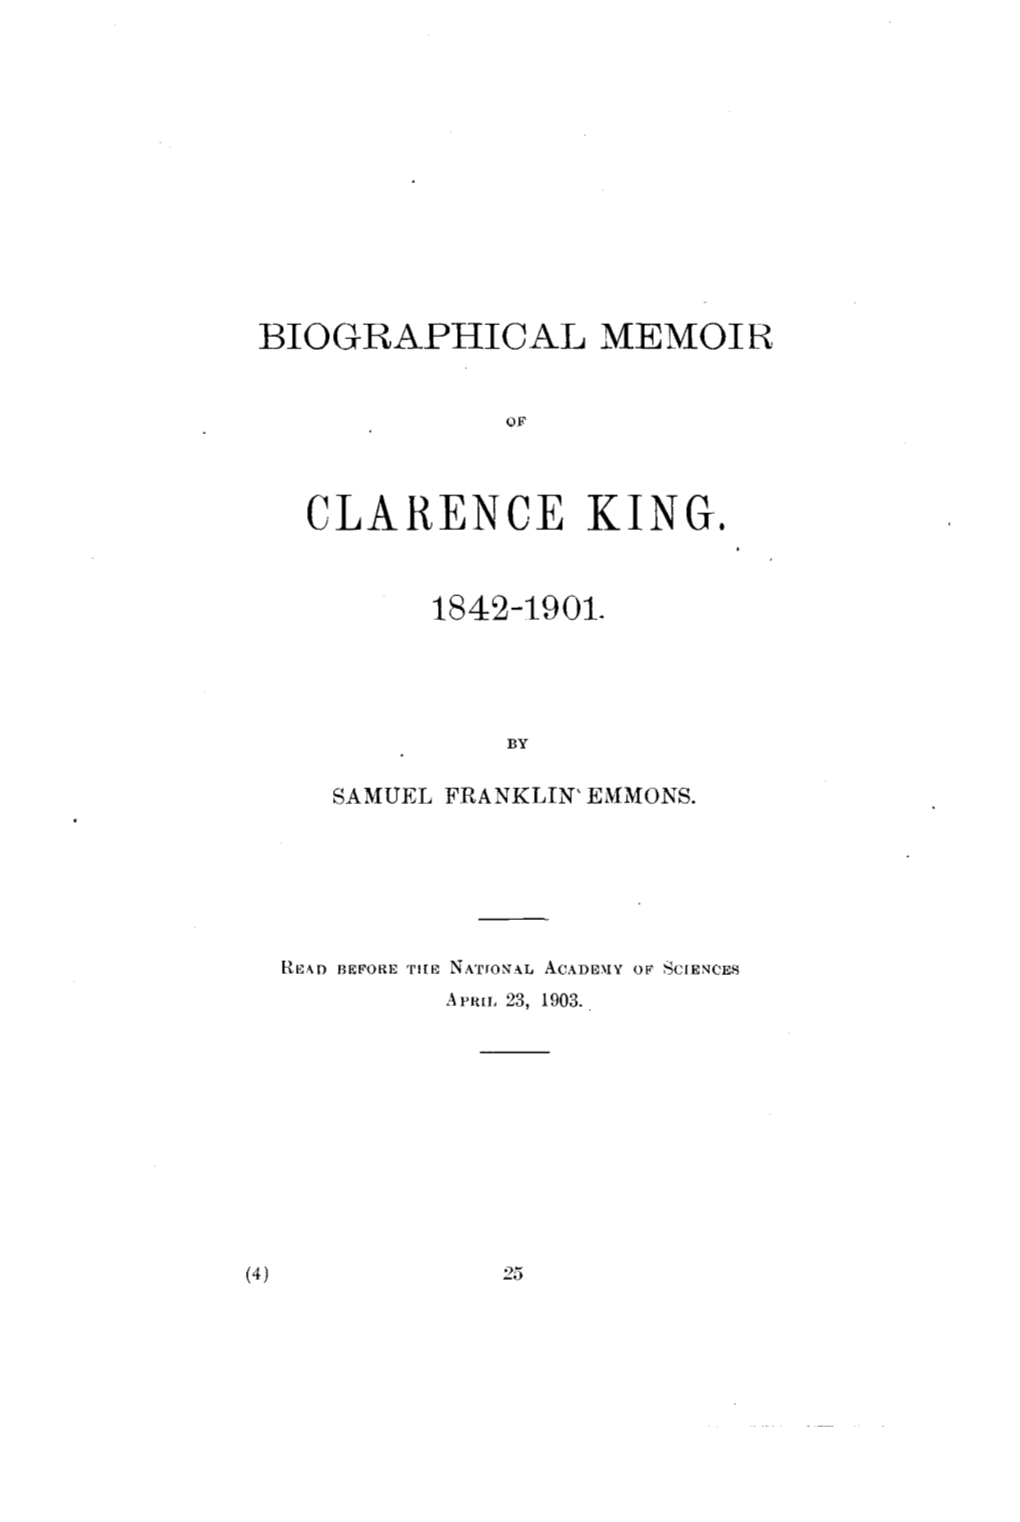 Clarence King